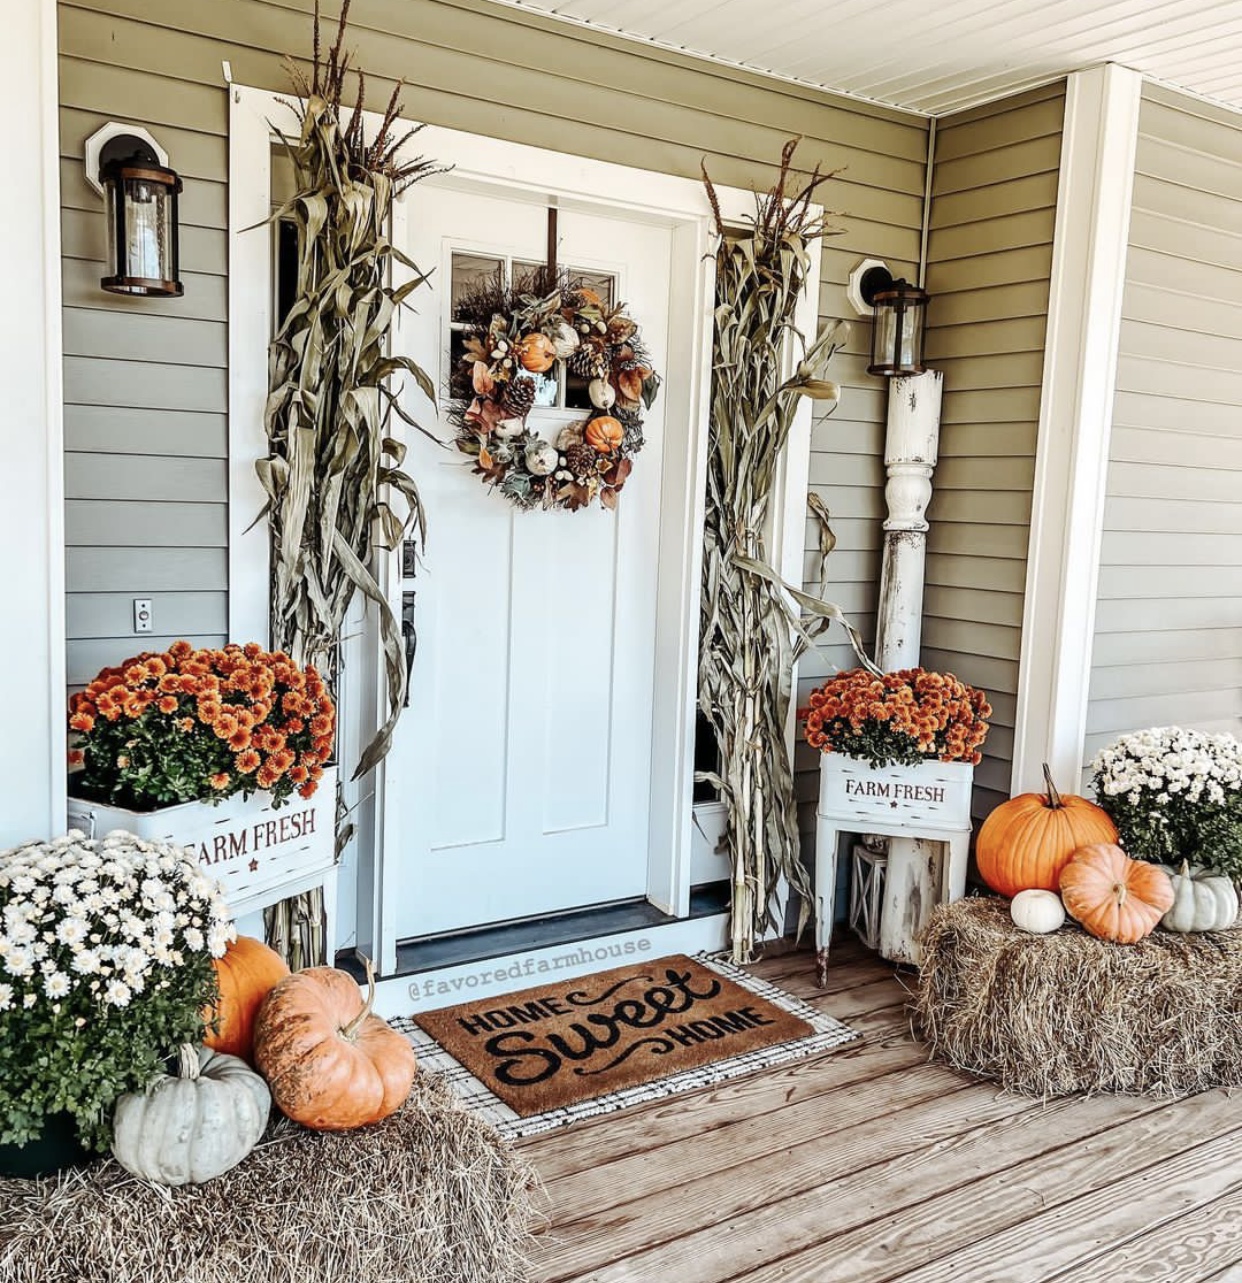 25 Fall Porch Decorating Ideas For a Cozy and Welcoming Entrance